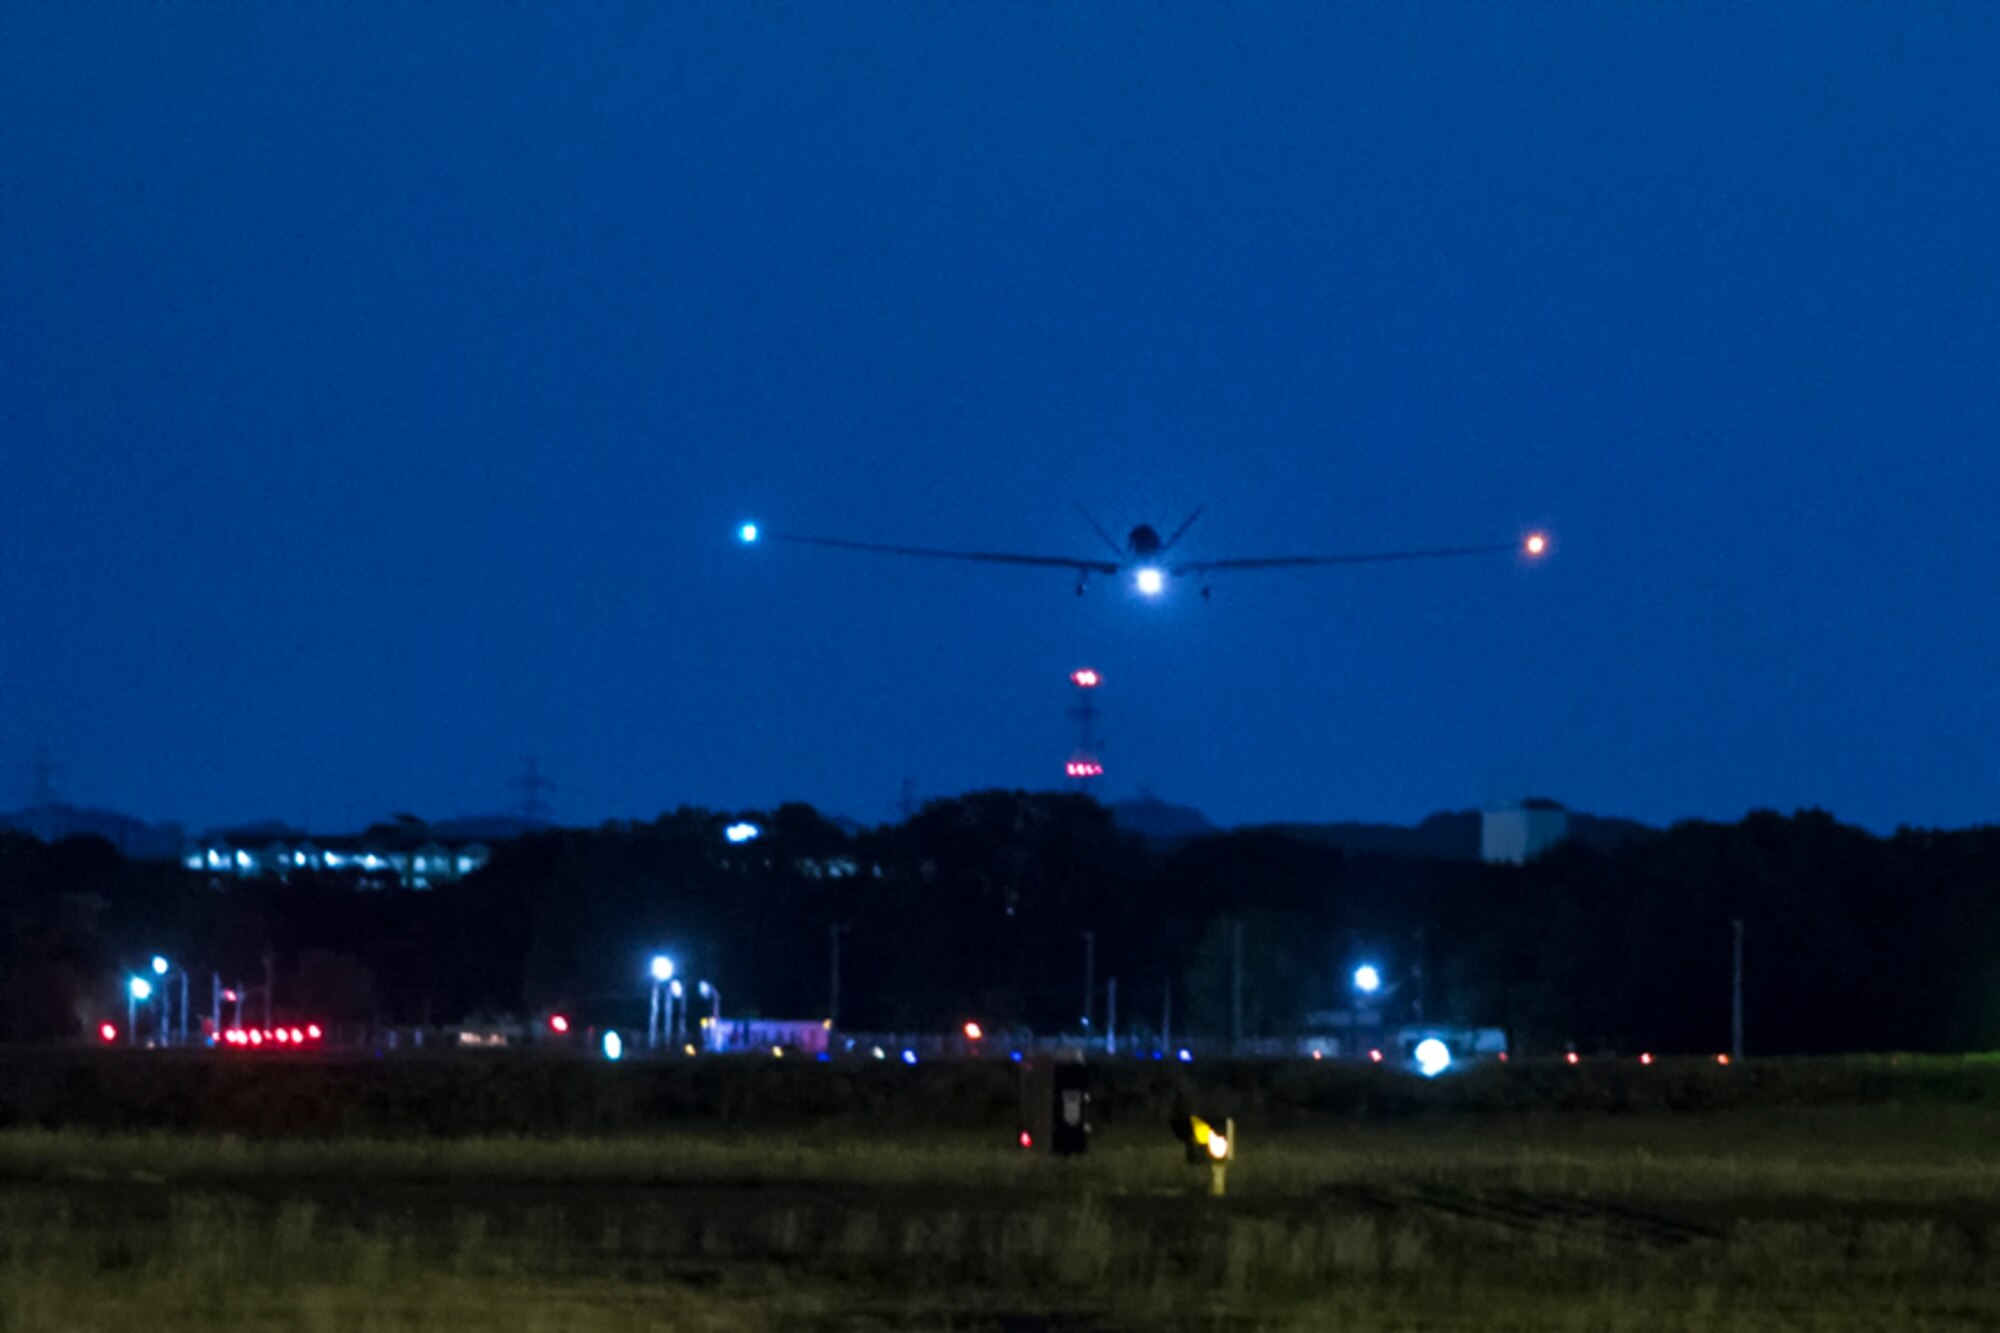 An RQ-4 Global Hawk approaches Yokota Air Base, Japan, May 1, 2017. The aircraft is part of the 69th Reconnaissance Group Detachment 1 and provides near real-time aerial imagery reconnaissance support to U.S. and partner nations assisting in multitude of operations. This capability was effectively employed during Operation Tomodachi, a relief effort launched when a 9.0-magnitude earthquake resulted in a tsunami that ravaged northeastern Japan in 2011. (U.S. Air Force photo by Yasuo Osakabe)